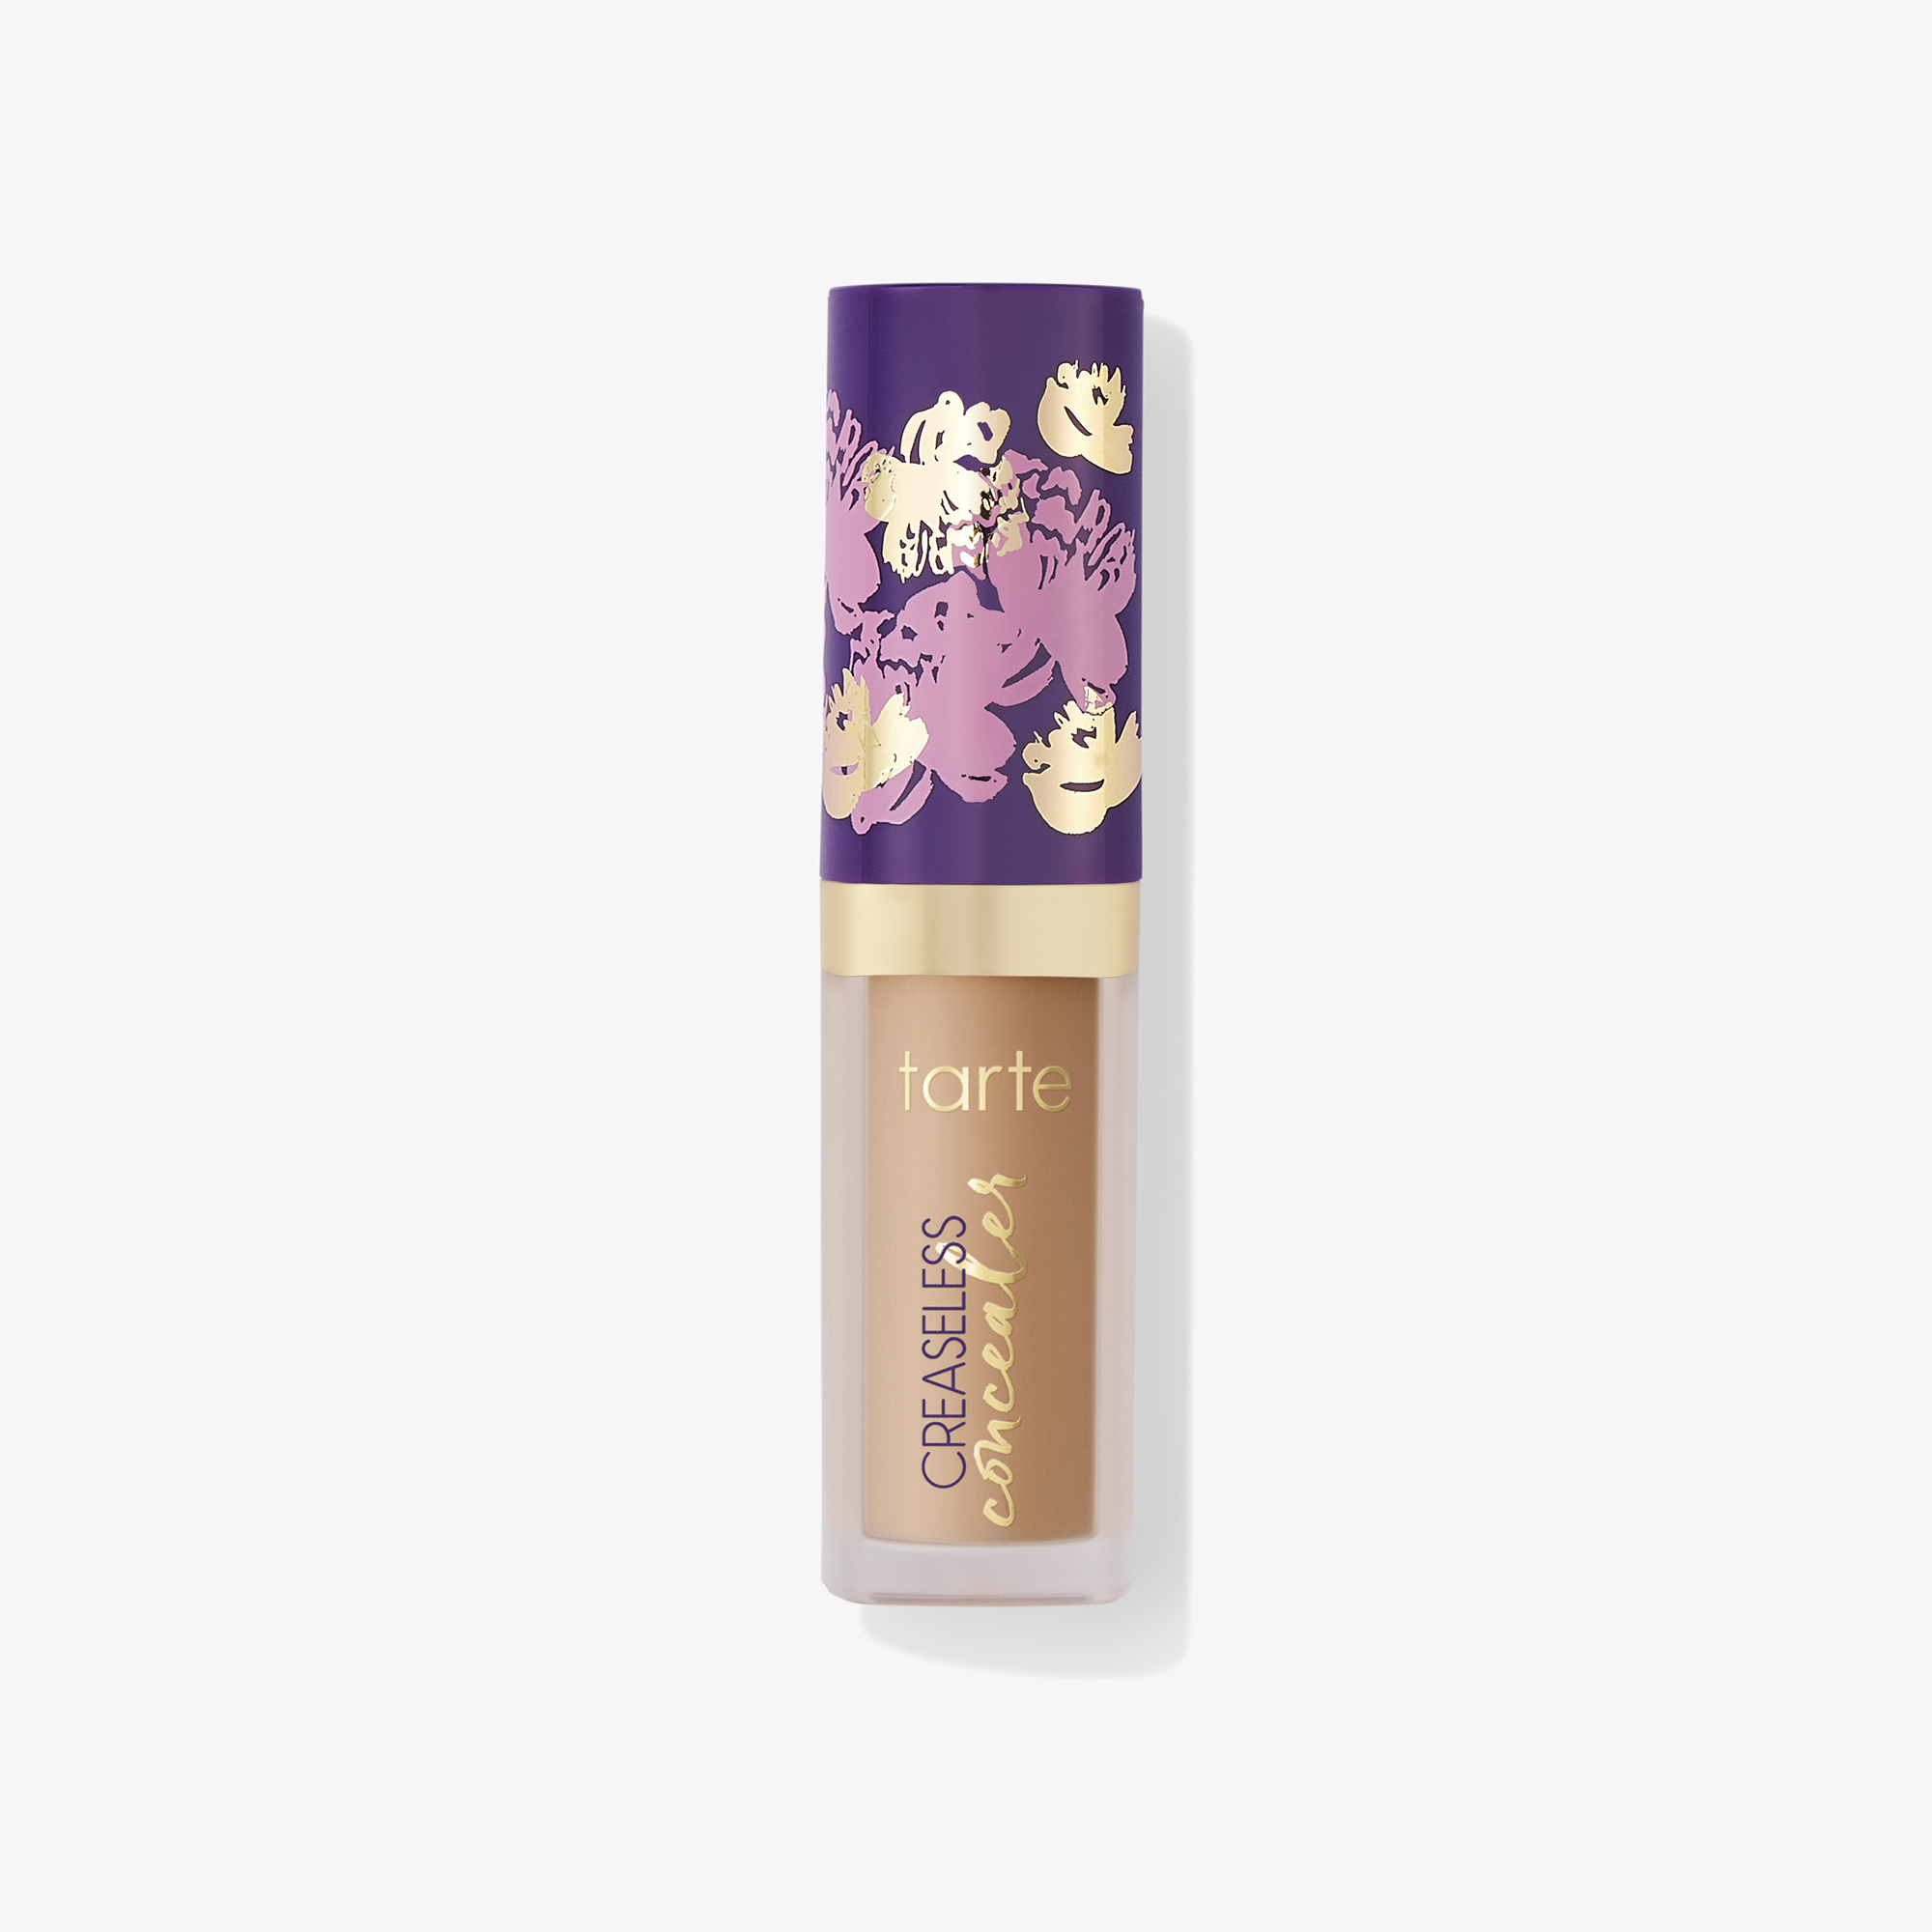 Tarte Cosmetics Travel-size Creaseless Concealerâ?¢ In White